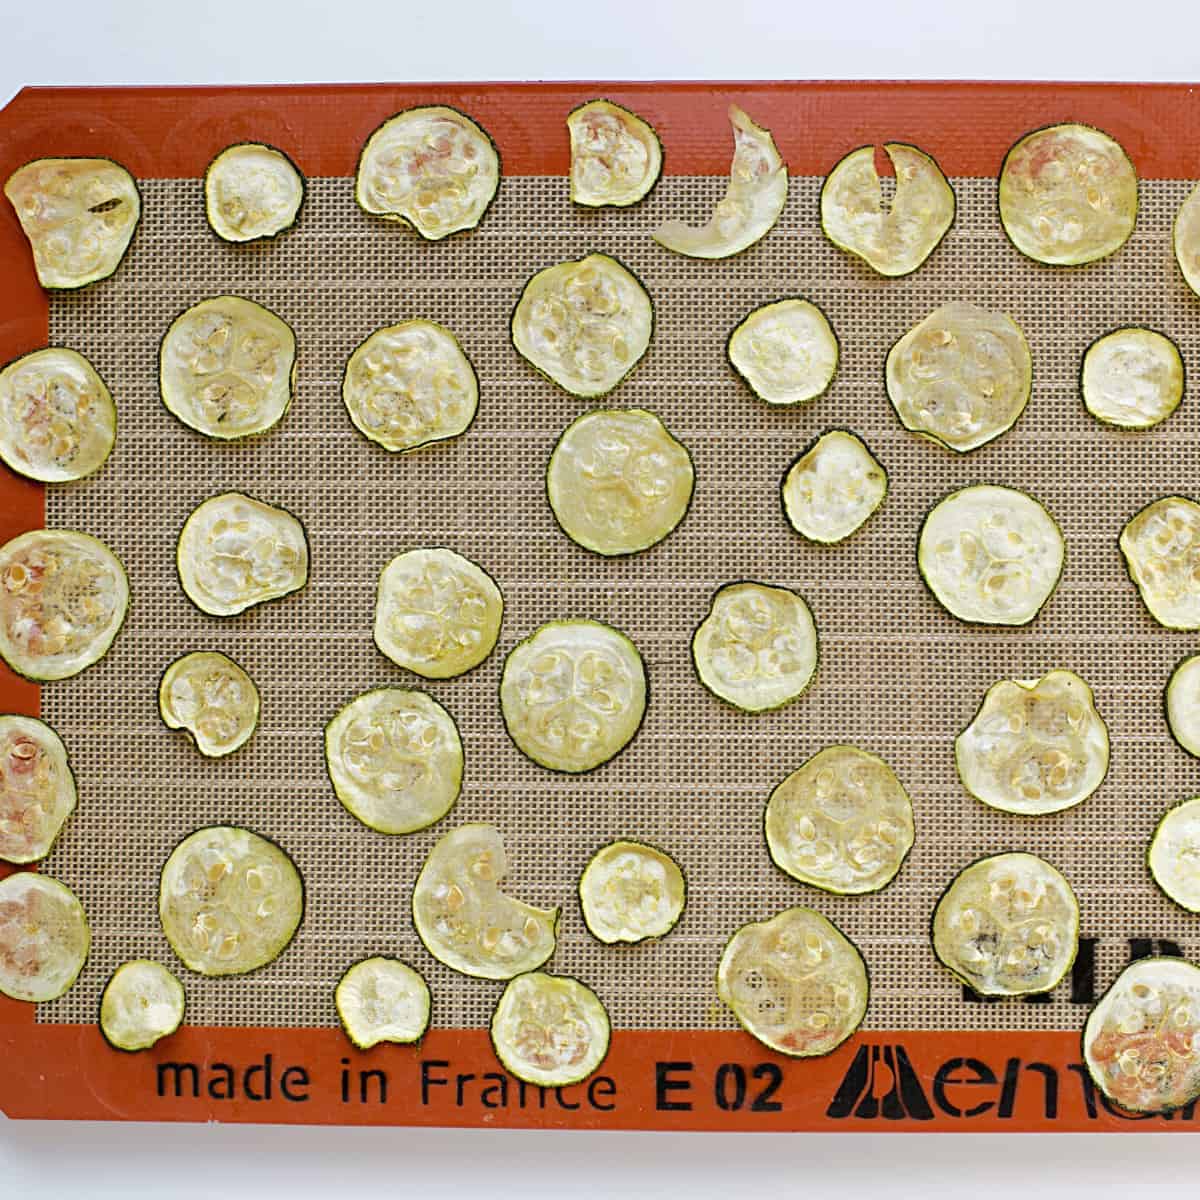 baked zucchini slices on lined baking sheet.